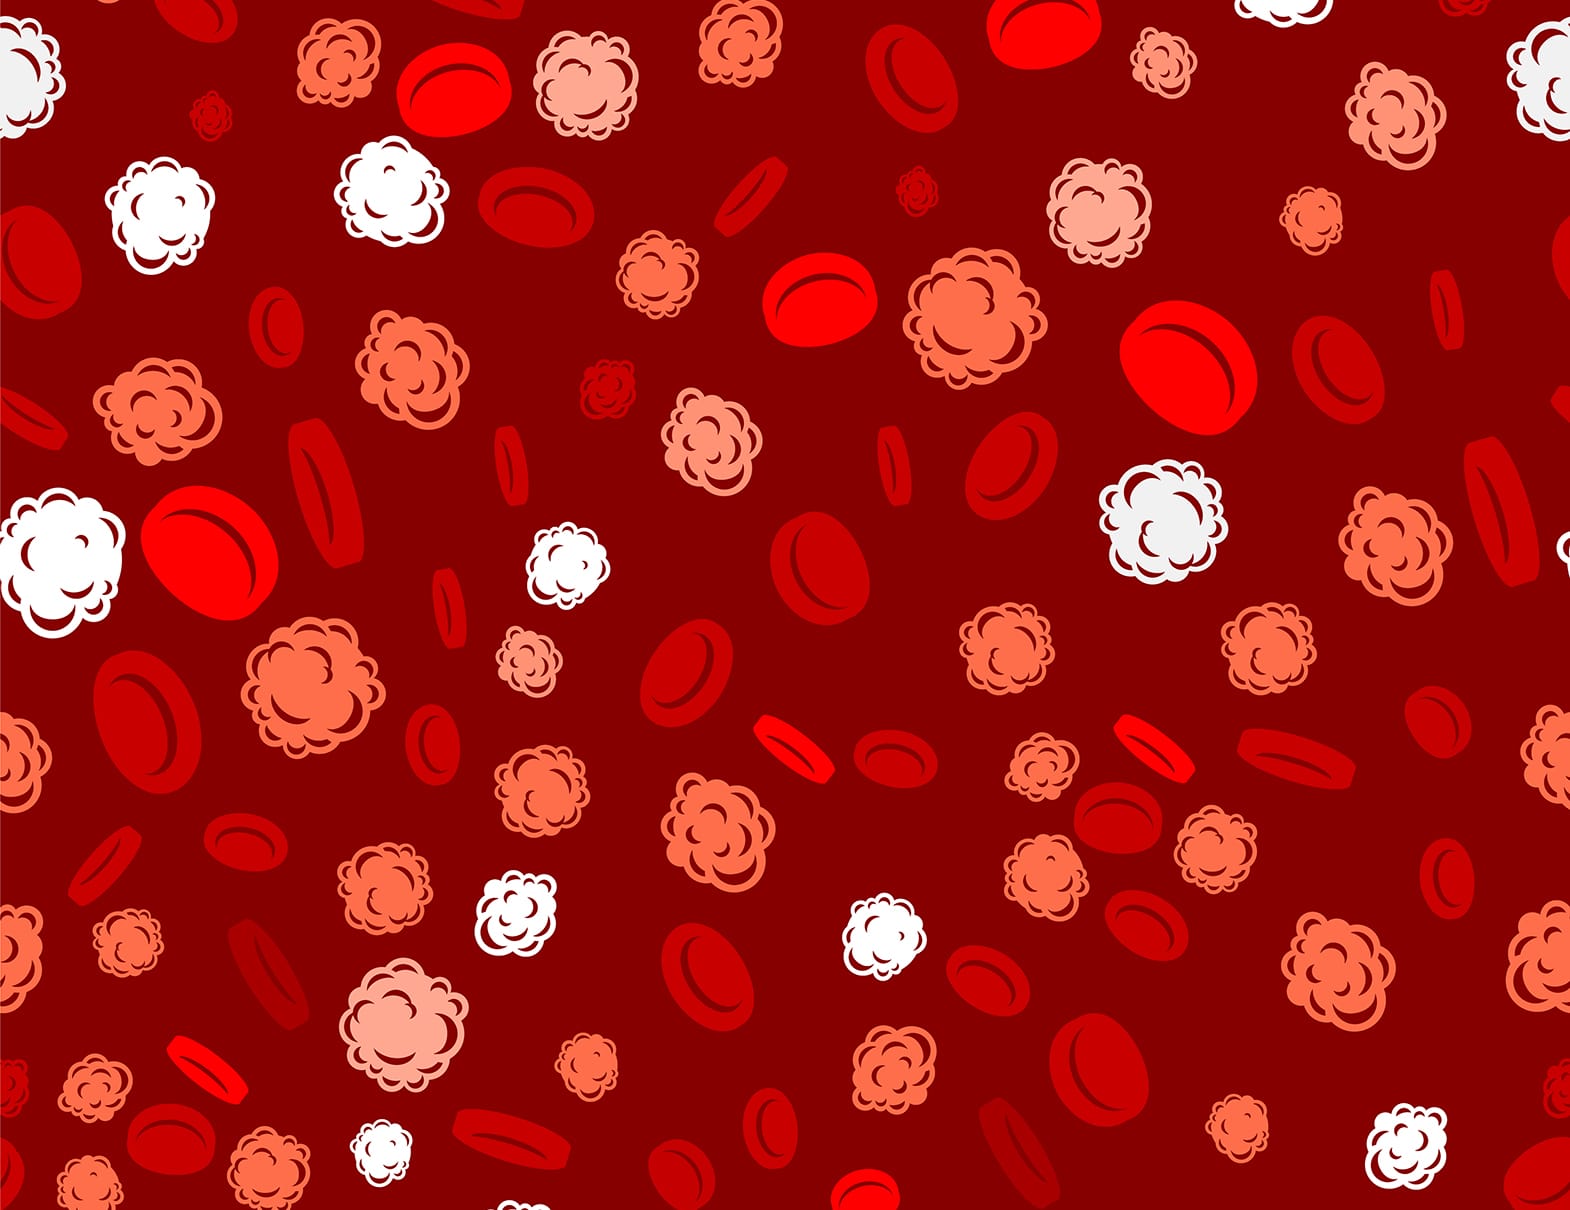 Clonal Hematopoiesis: You Are Not the Same Person You Used to Be